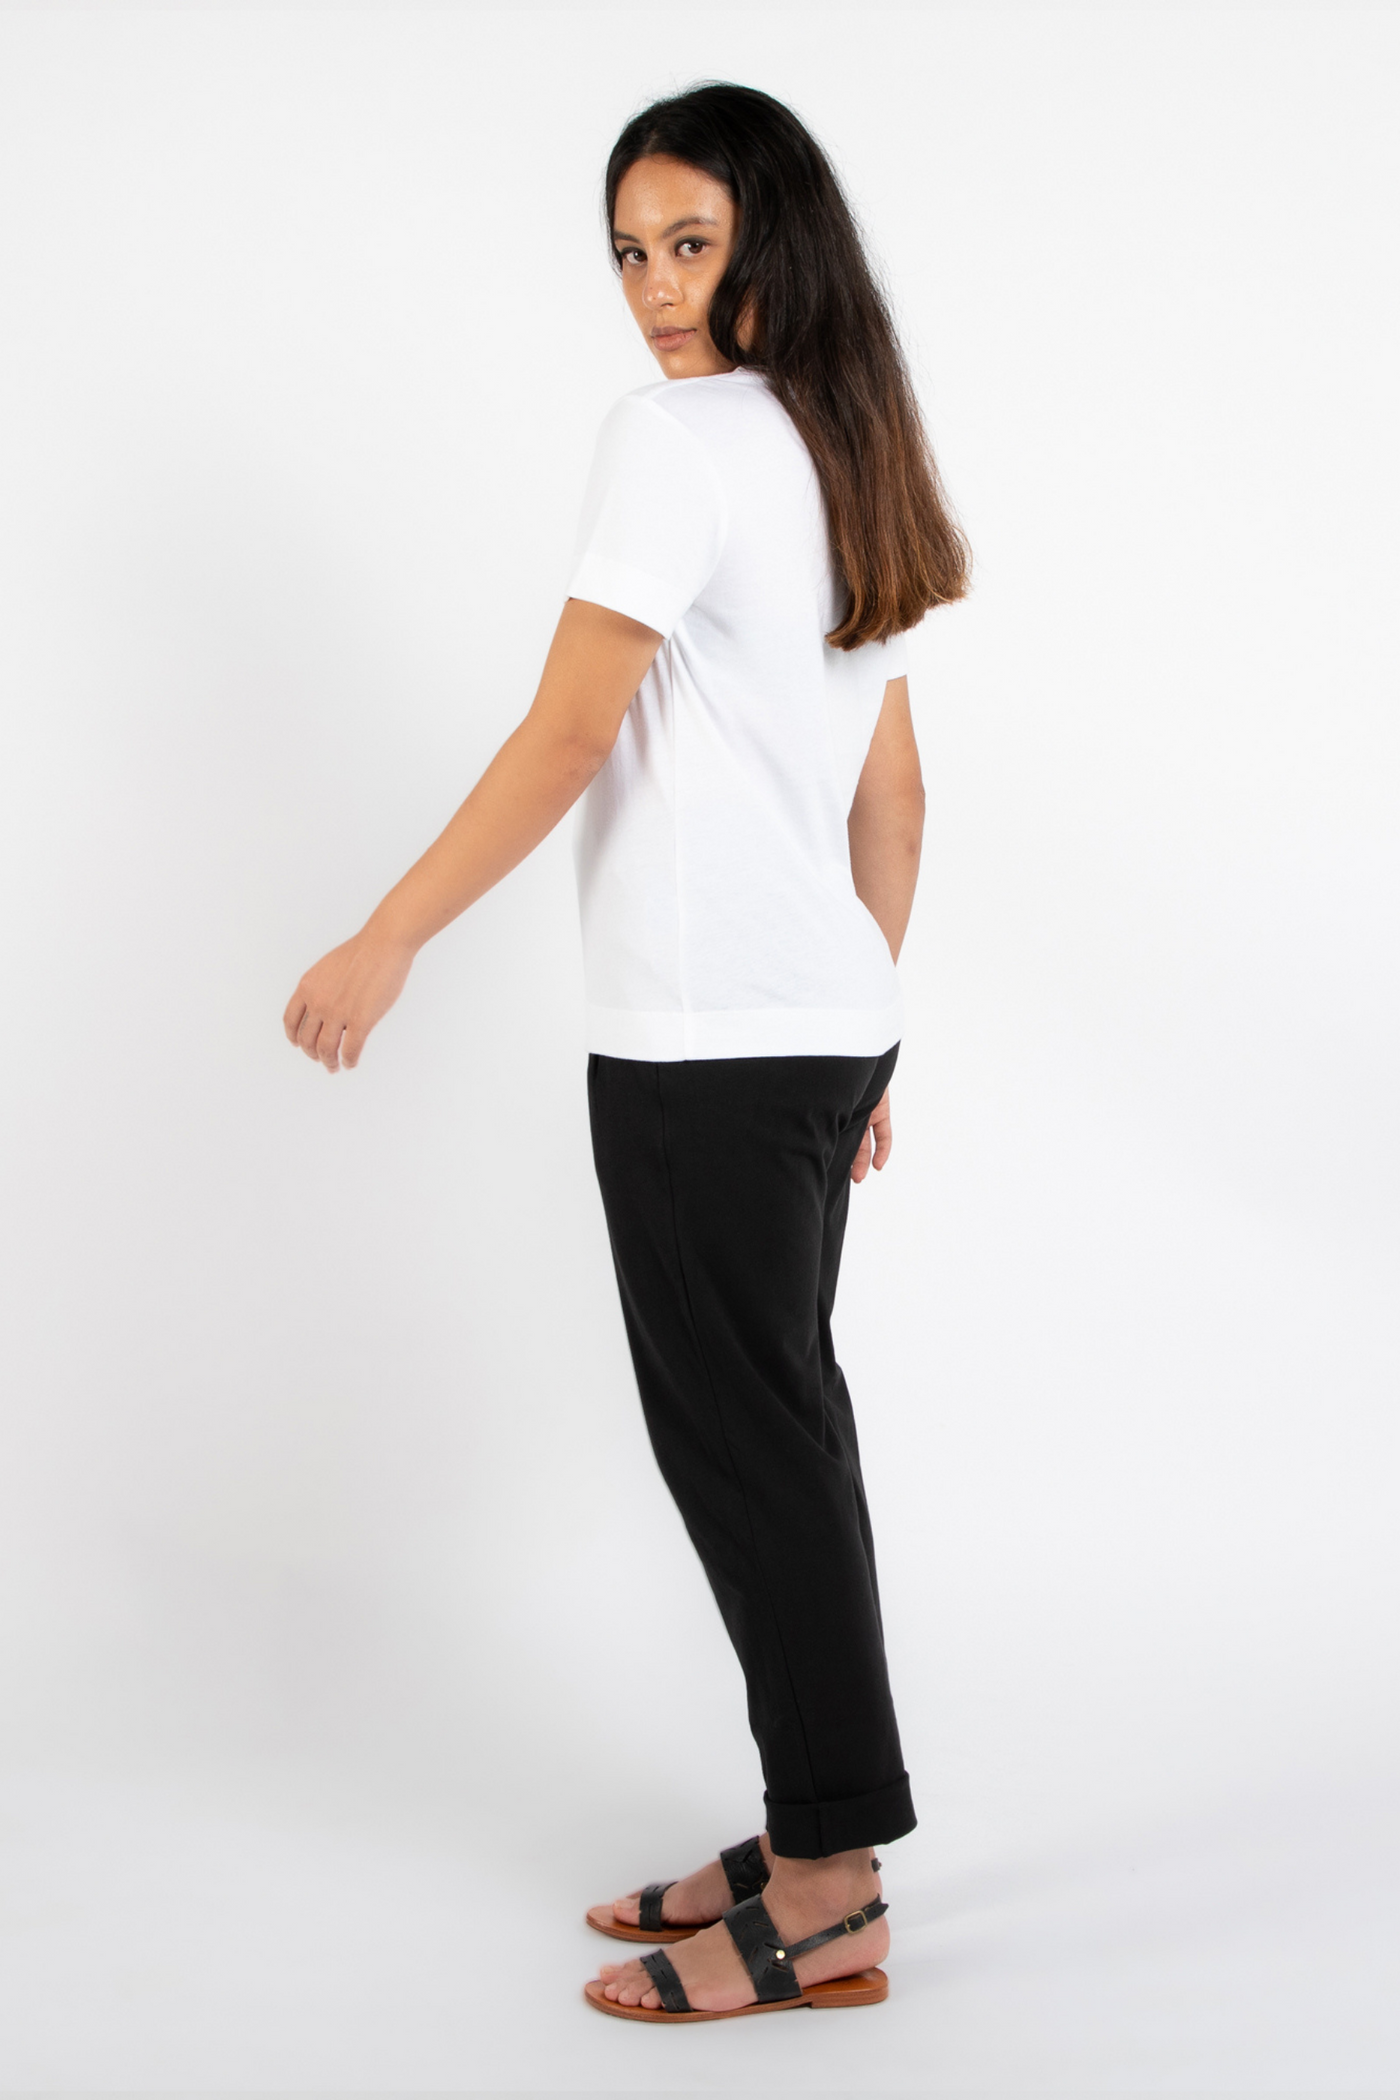 Dorsu Classic T-shirt in White, available on ZERRIN 